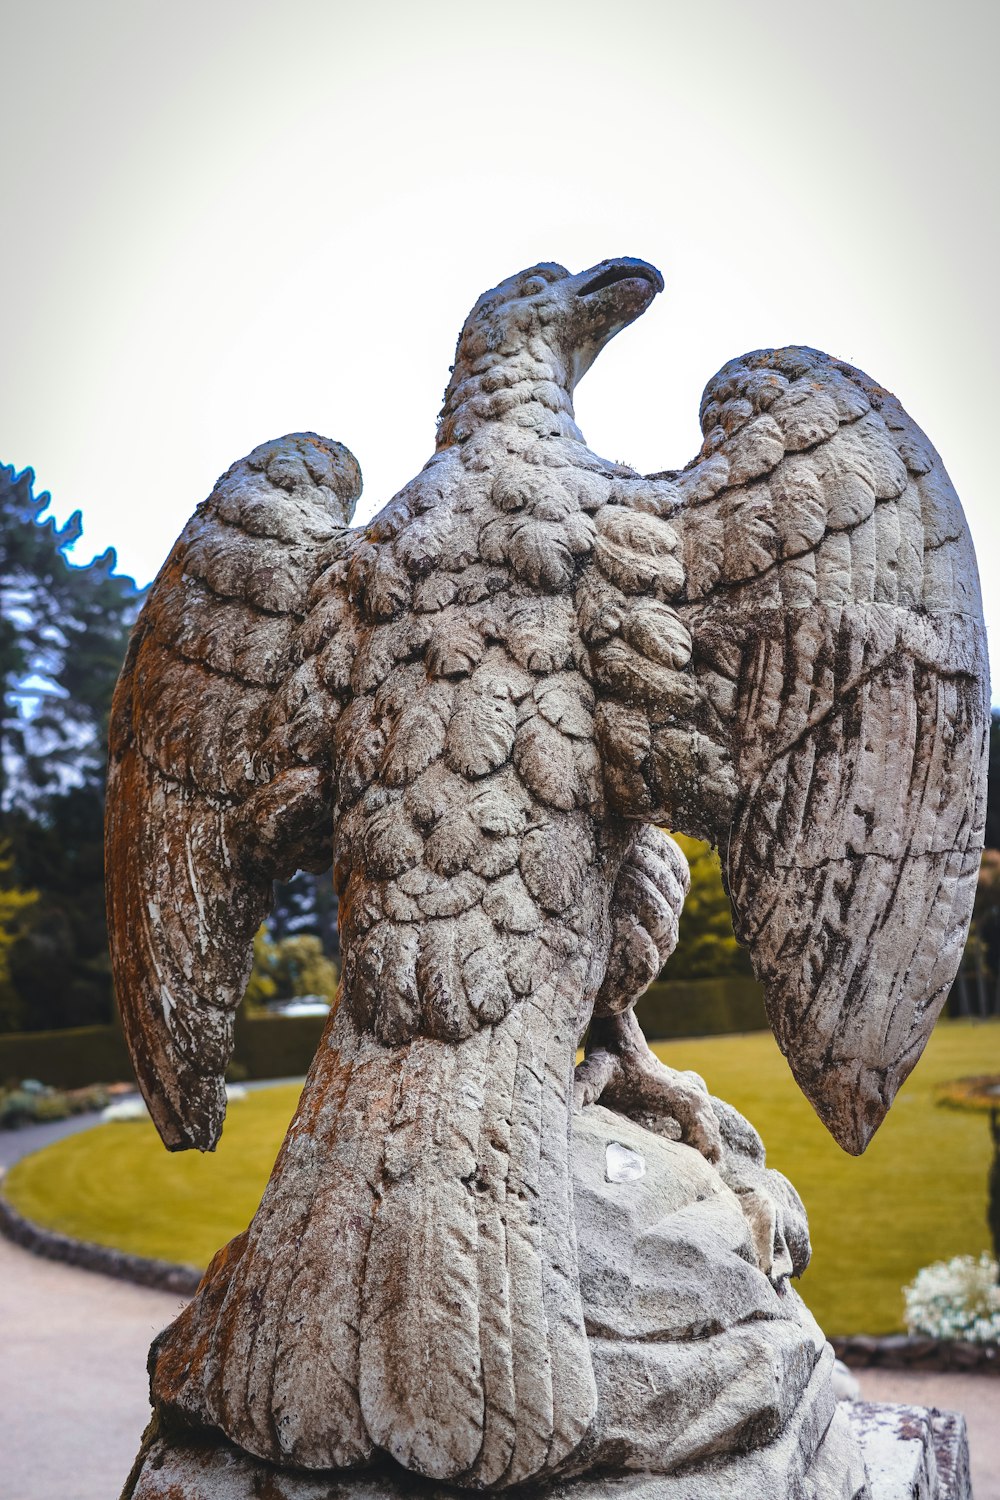 a statue of an eagle on a rock in a park